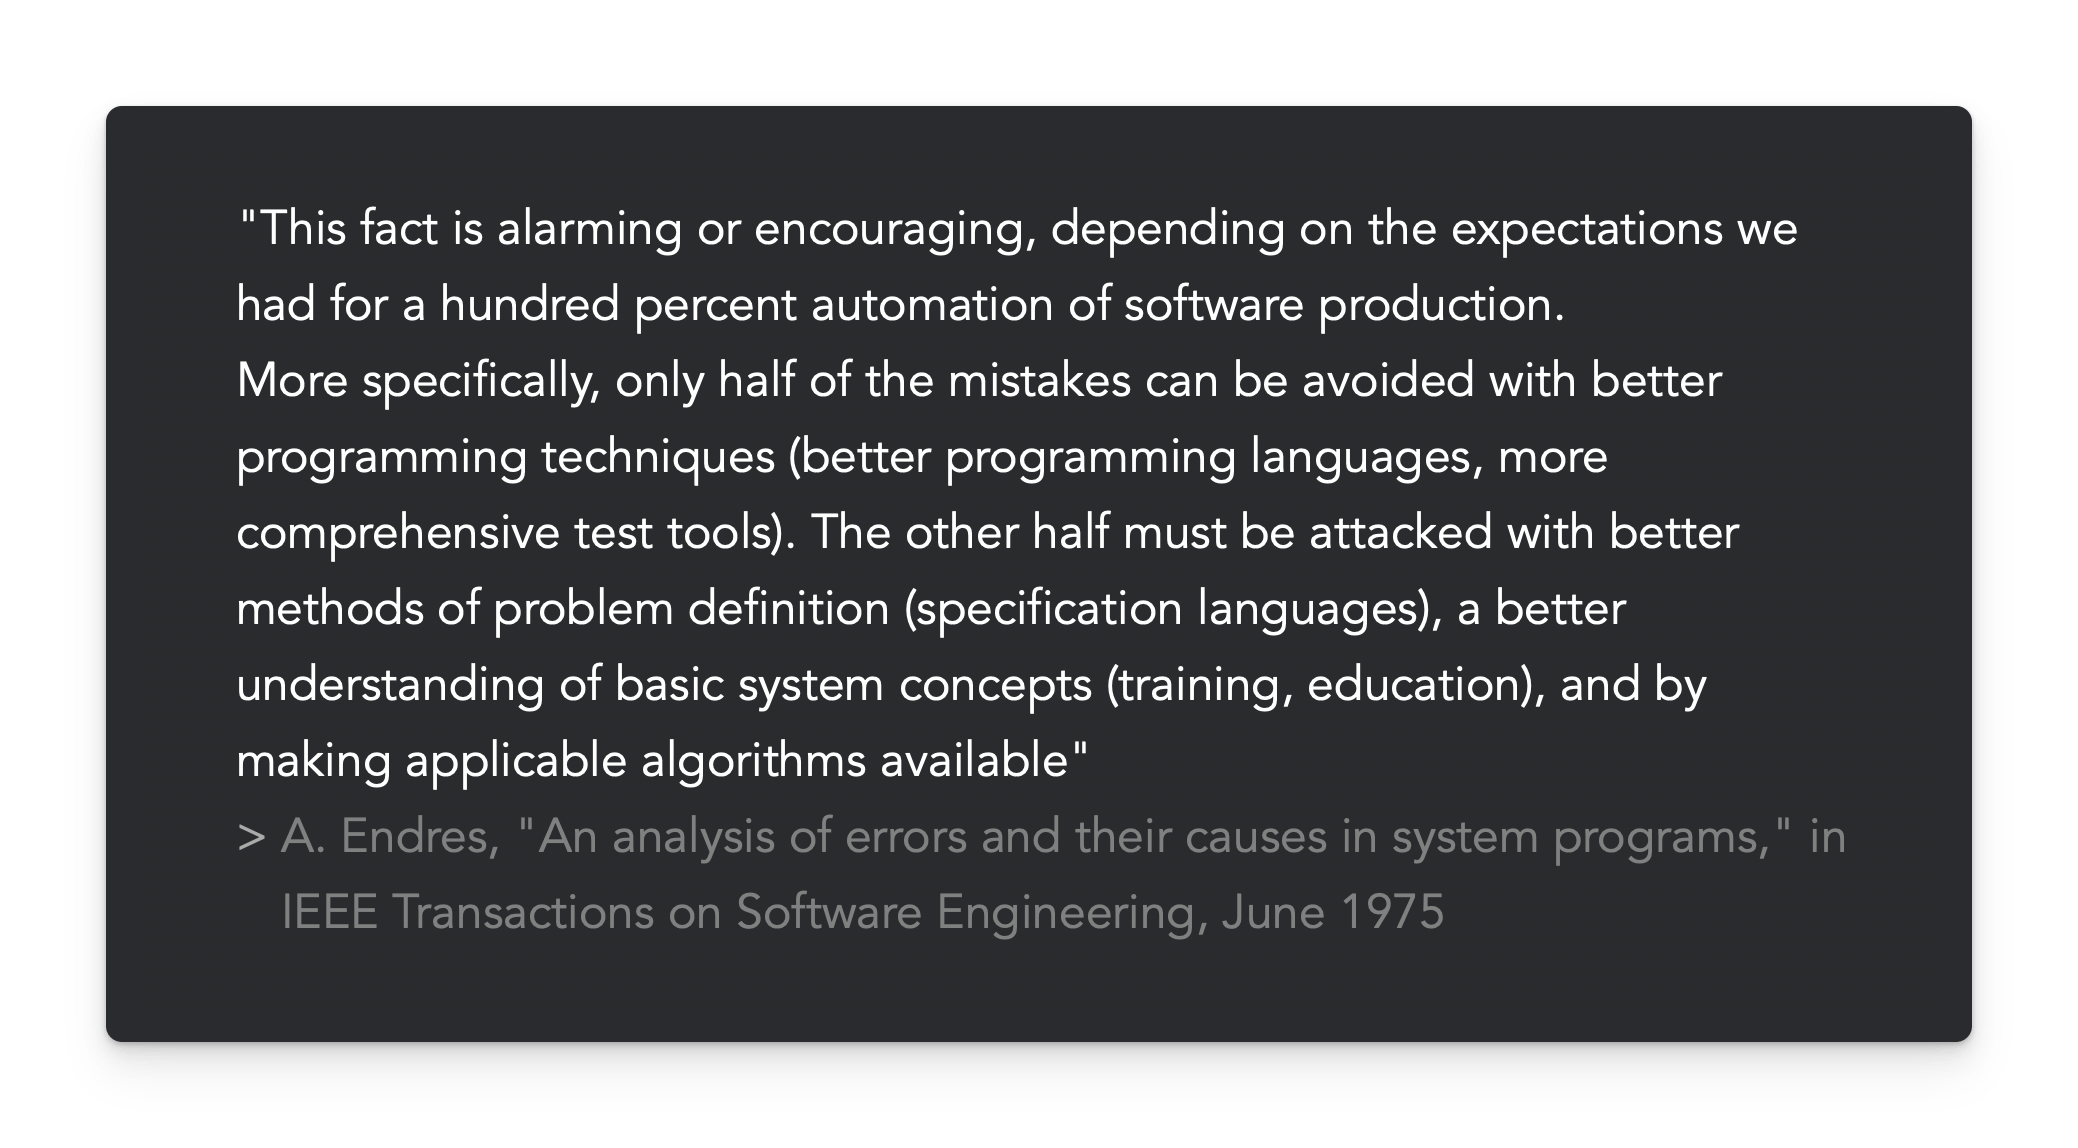 "This fact is alarming or encouraging, depending on the expectations we had for a hundred percent automation of software production.  More specifically, only half of the mistakes can be avoided with better programming techniques (better programming languages, more comprehensive test tools). The other half must be attacked with better methods of problem definition (specification languages), a better understanding of basic system concepts (training, education), and by making applicable algorithms available"